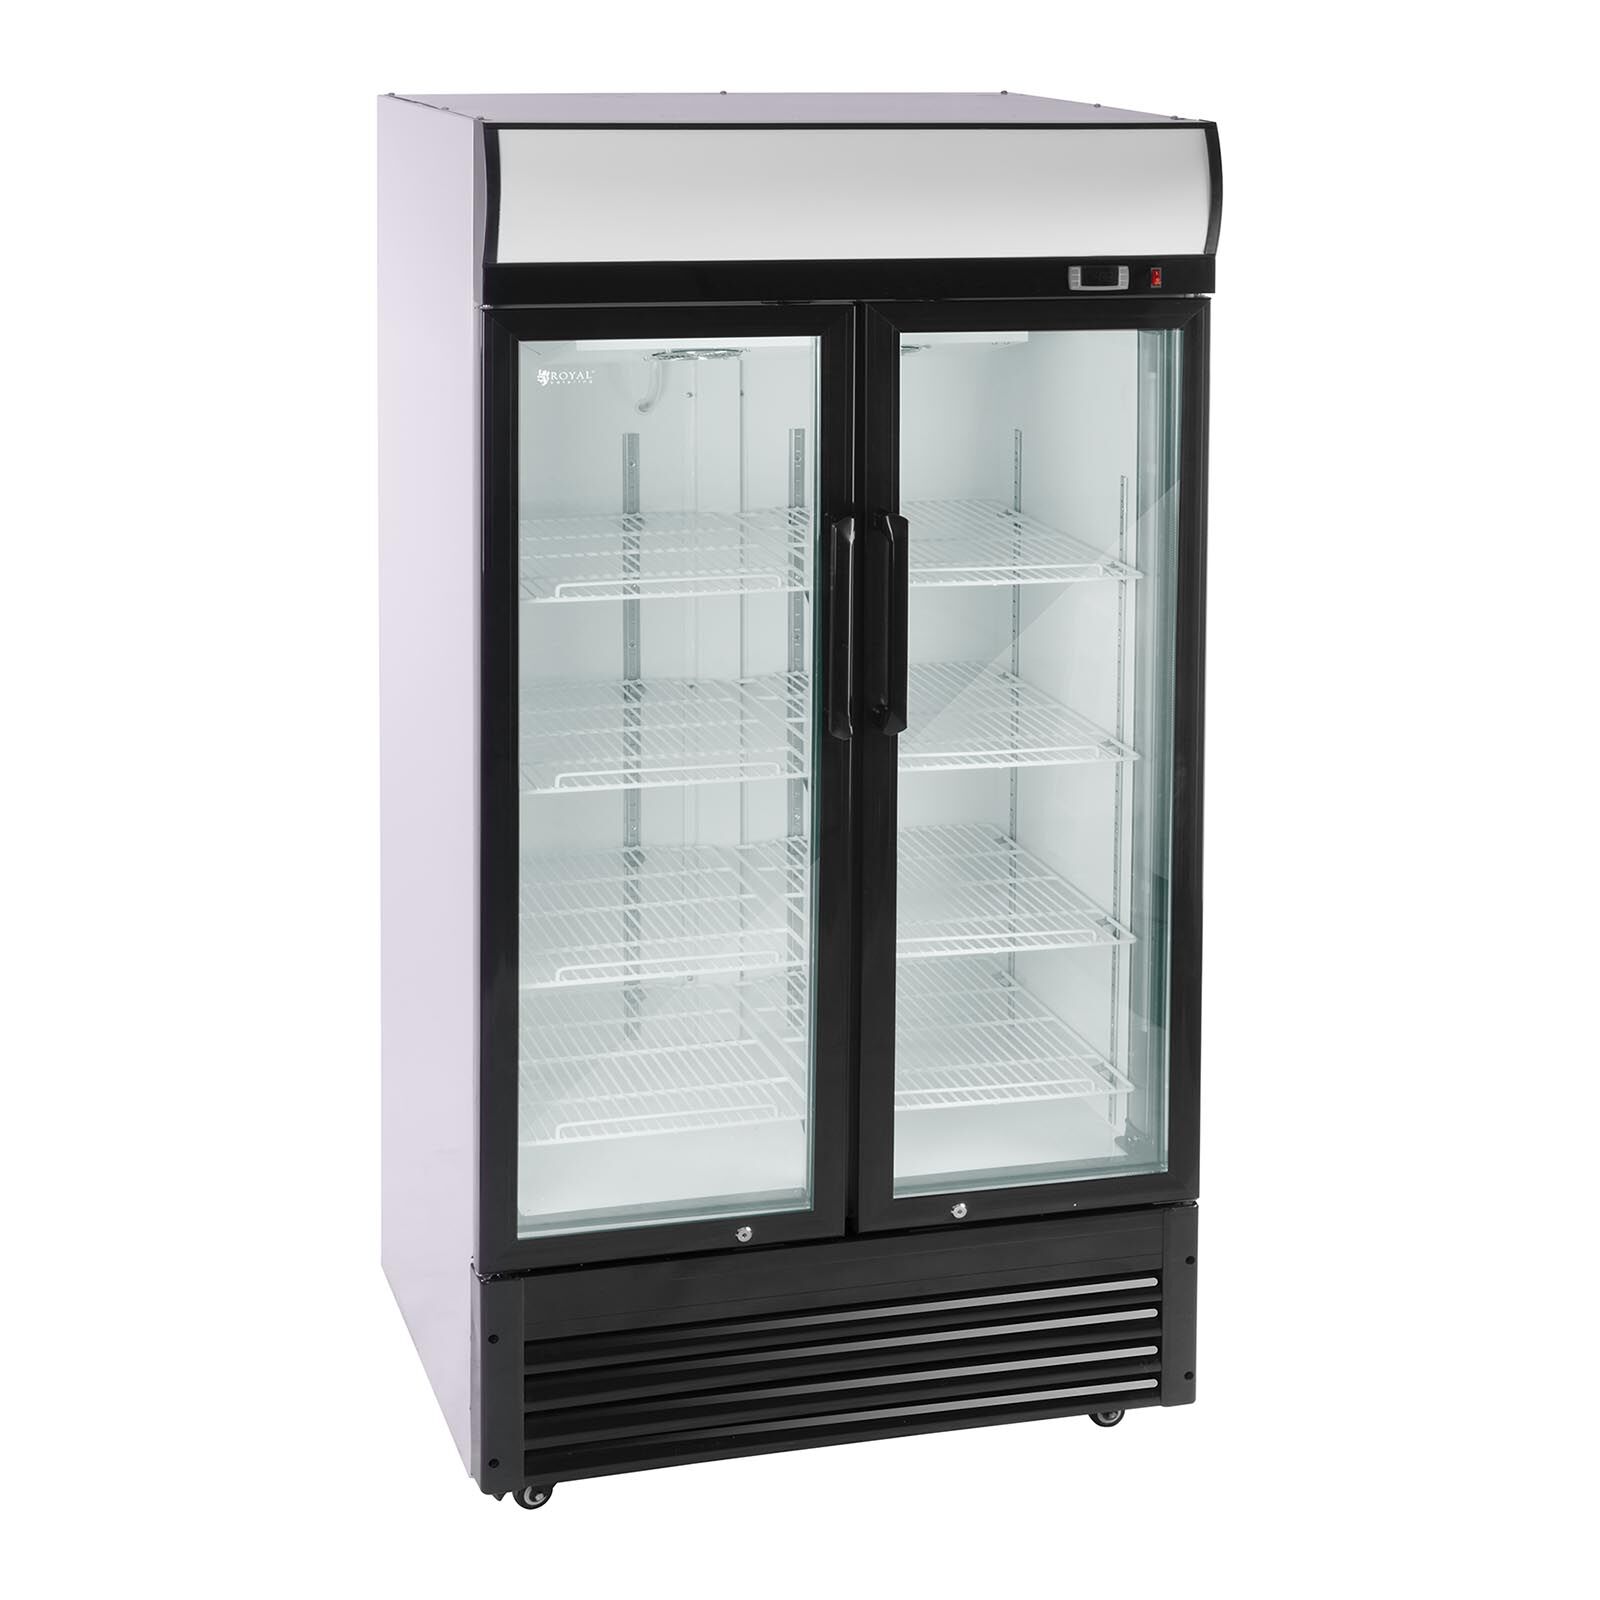 Royal Catering Juomakaappi - 630 l